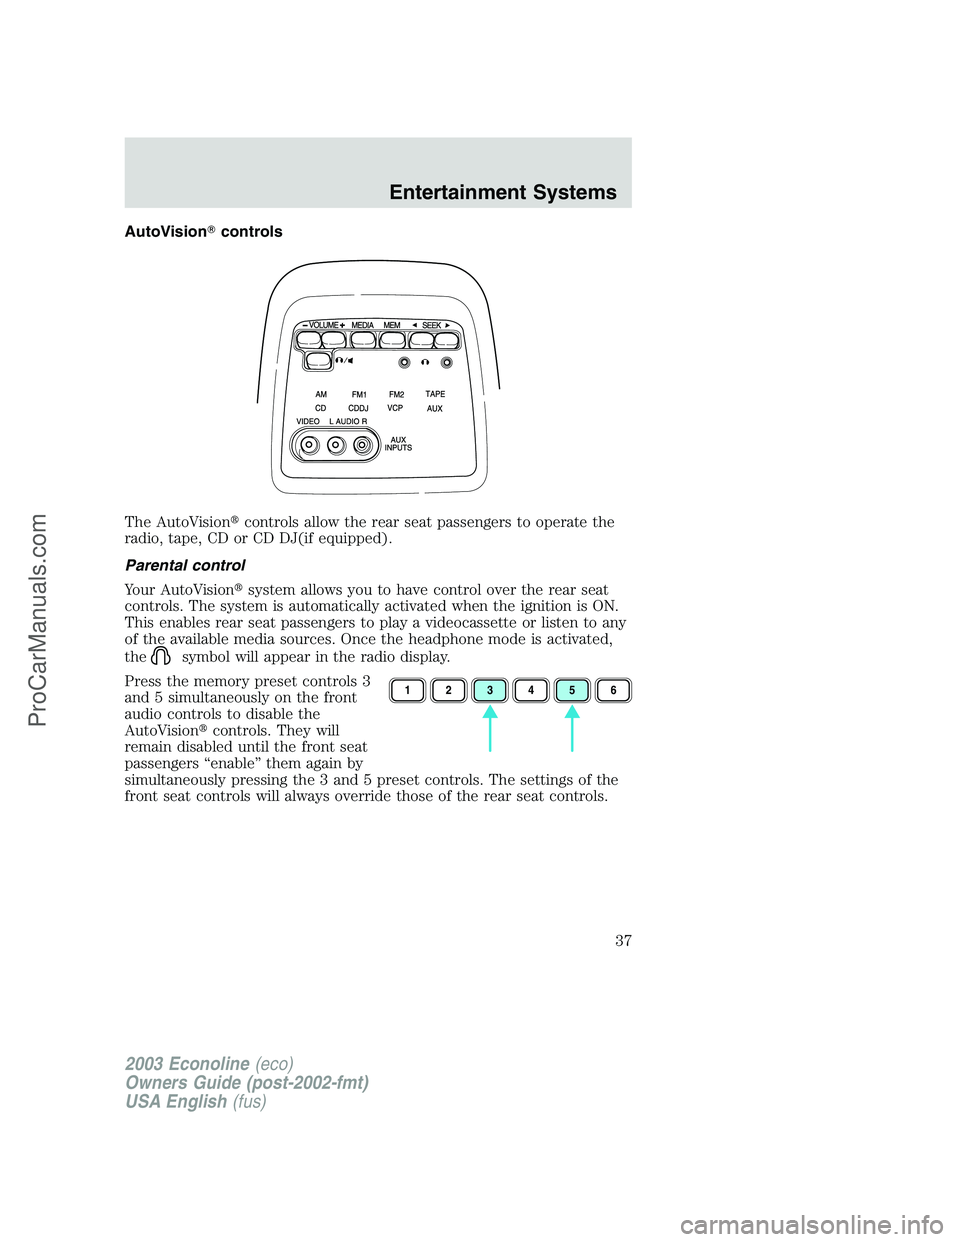 FORD ECONOLINE 2003  Owners Manual AutoVisioncontrols
The AutoVisioncontrols allow the rear seat passengers to operate the
radio, tape, CD or CD DJ(if equipped).
Parental control
Your AutoVisionsystem allows you to have control over